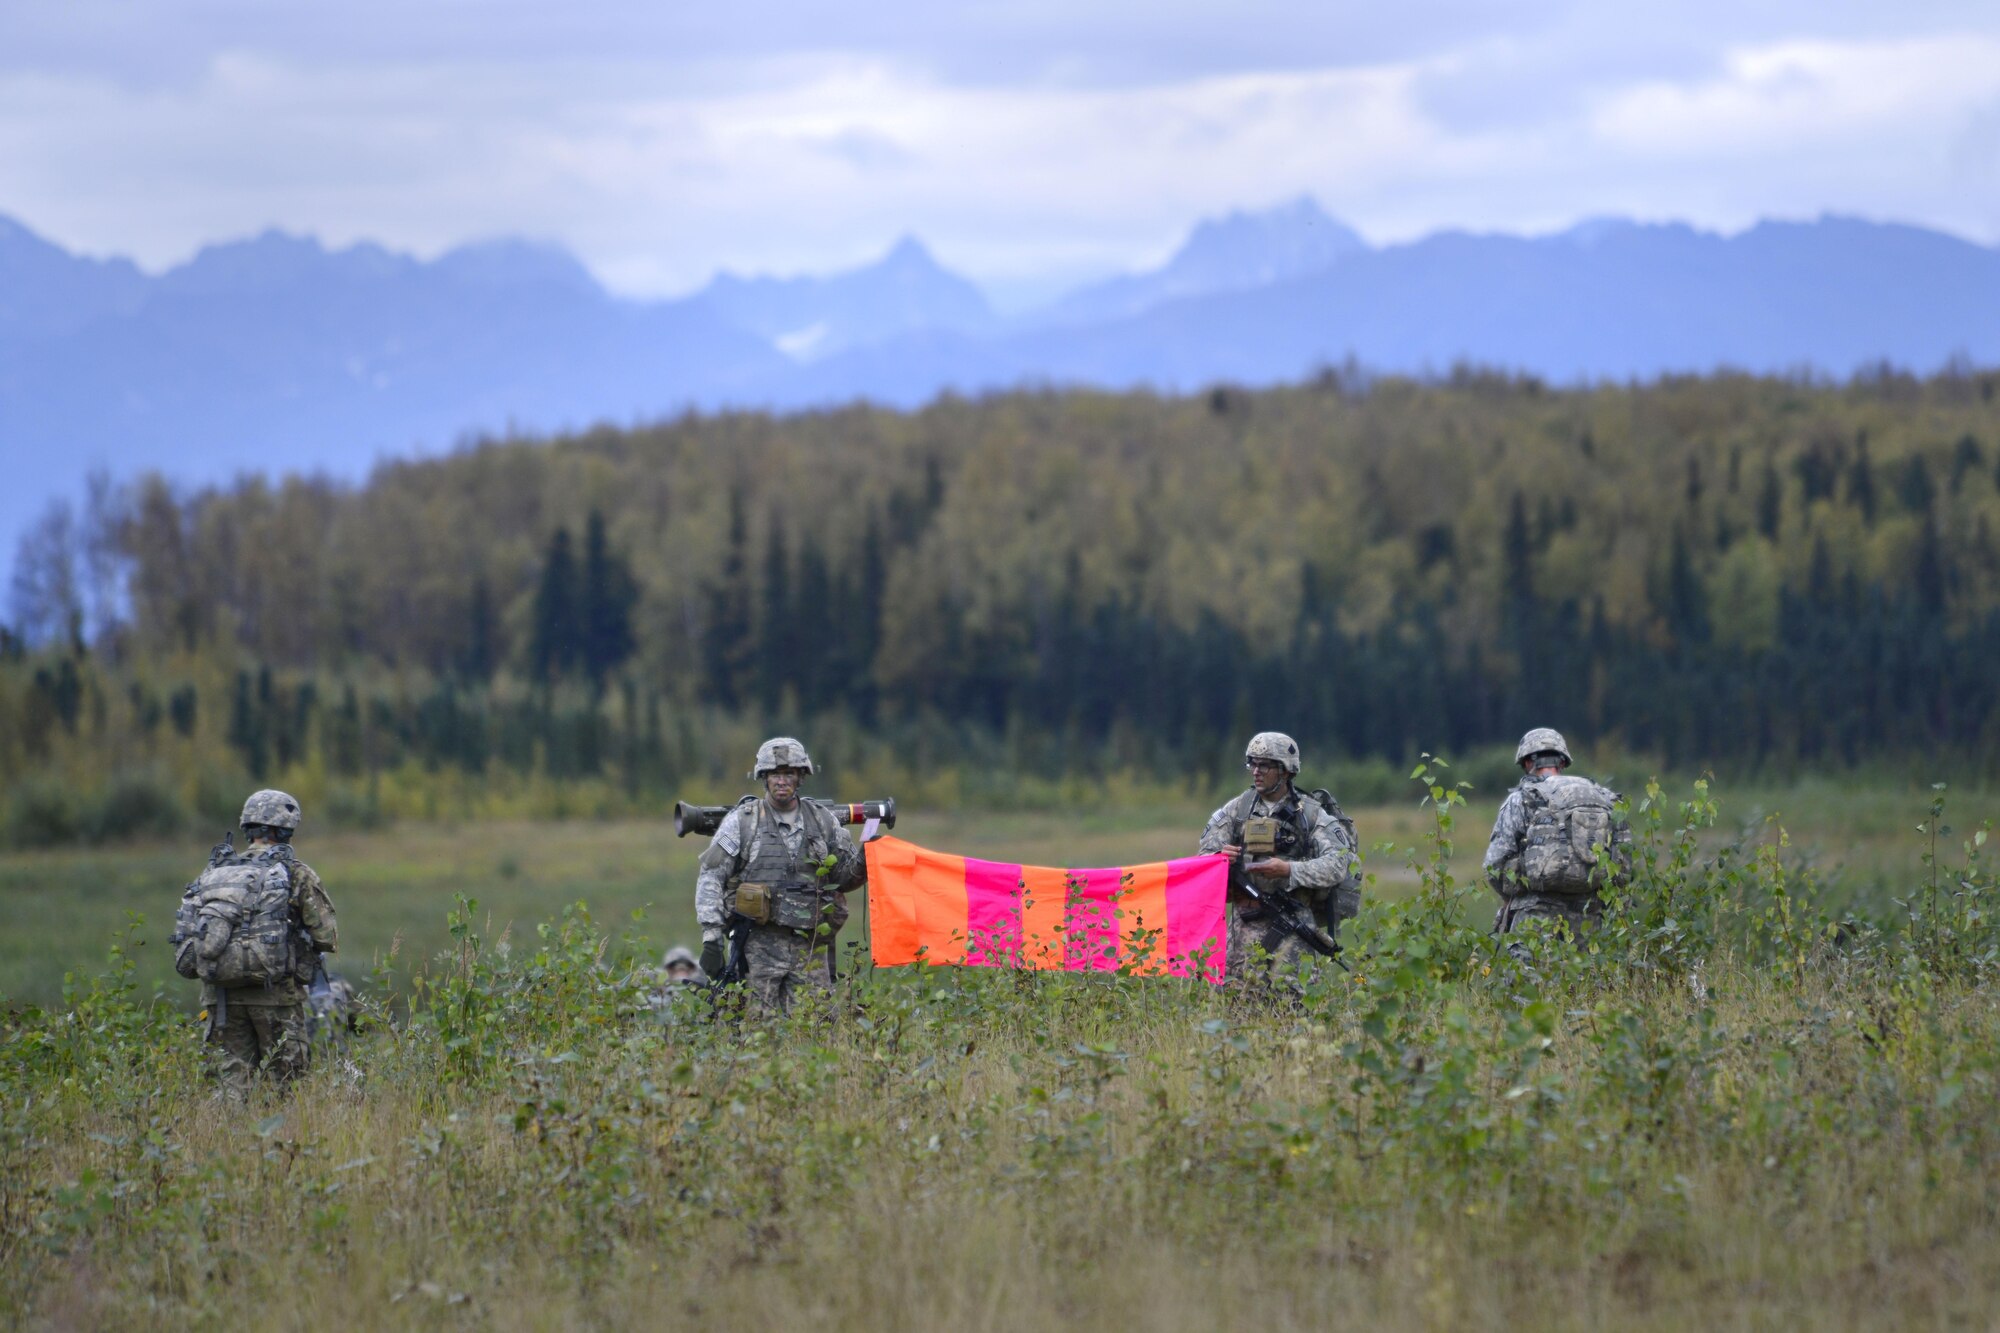 Paratroopers assigned to the 1st Battalion, 501st Parachute Infantry Regiment, 4th Infantry Brigade Combat Team (Airborne), 25th Infantry Division, U.S. Army Alaska, participate in a joint forcible entry exercise at Malemute Drop Zone on Joint Base Elmendorf-Richardson, Alaska, Aug. 23, 2016, as part of Exercise Spartan Agoge. Spartan Agoge is a brigade-level field training exercise that began Aug. 15, and focuses on an array of combat-related tasks from squad live-fire exercises to helicopter air insertion and airborne assault training. (U.S. Air Force photo by Airman 1st Class Valerie Monroy)